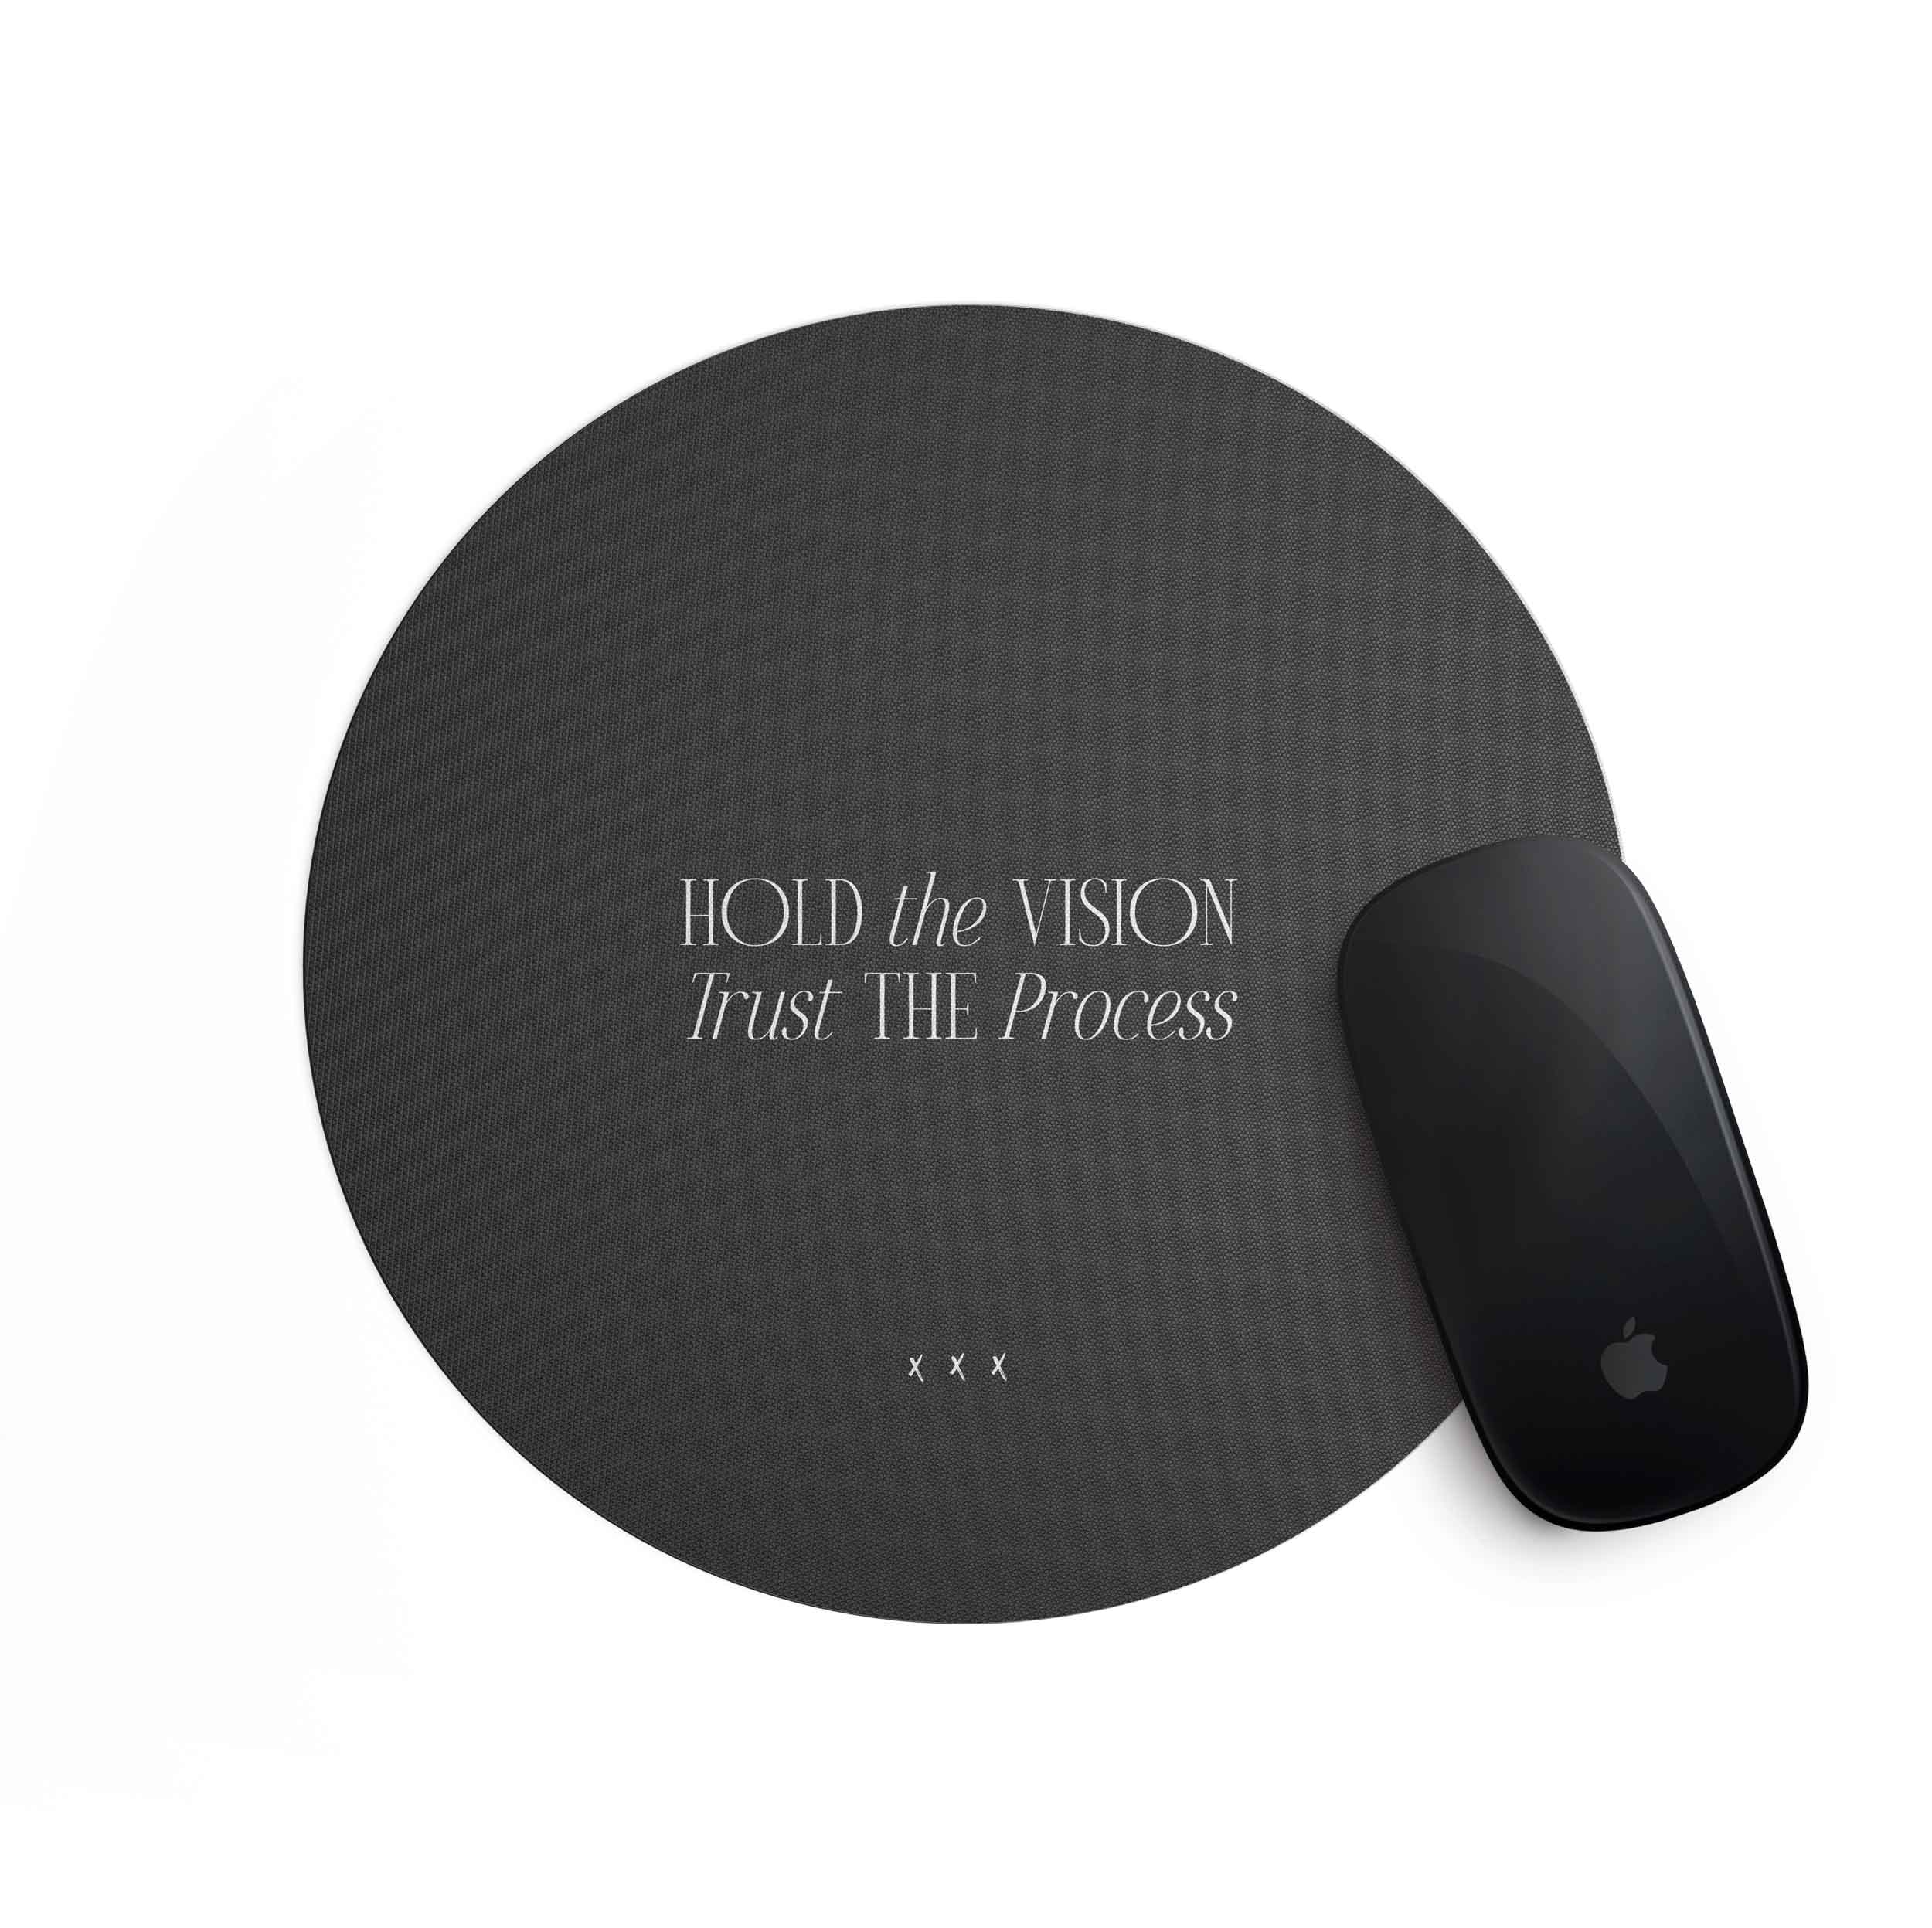 Mousepad, "Hold the Vision", black